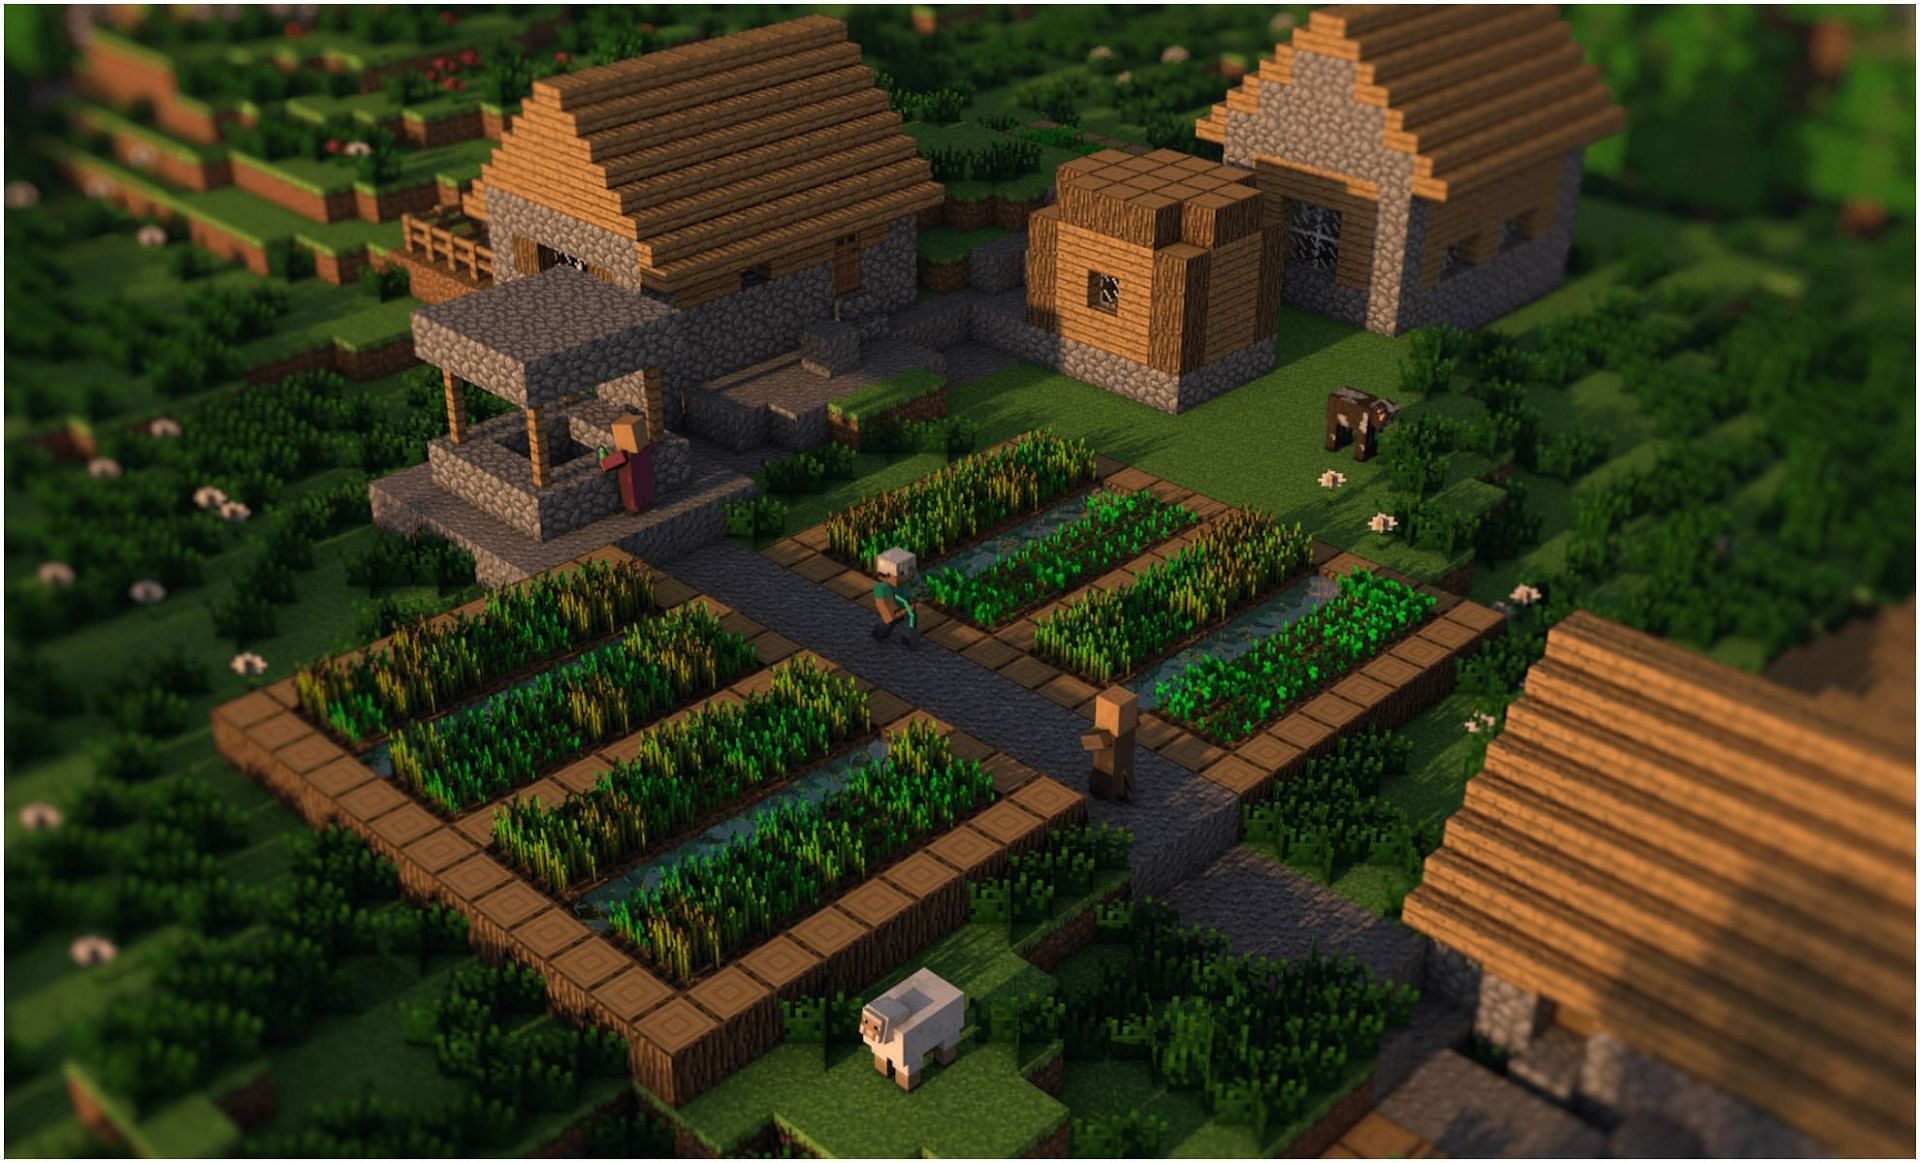 Villages can be profitable in Minecraft (Image via Minecraft)